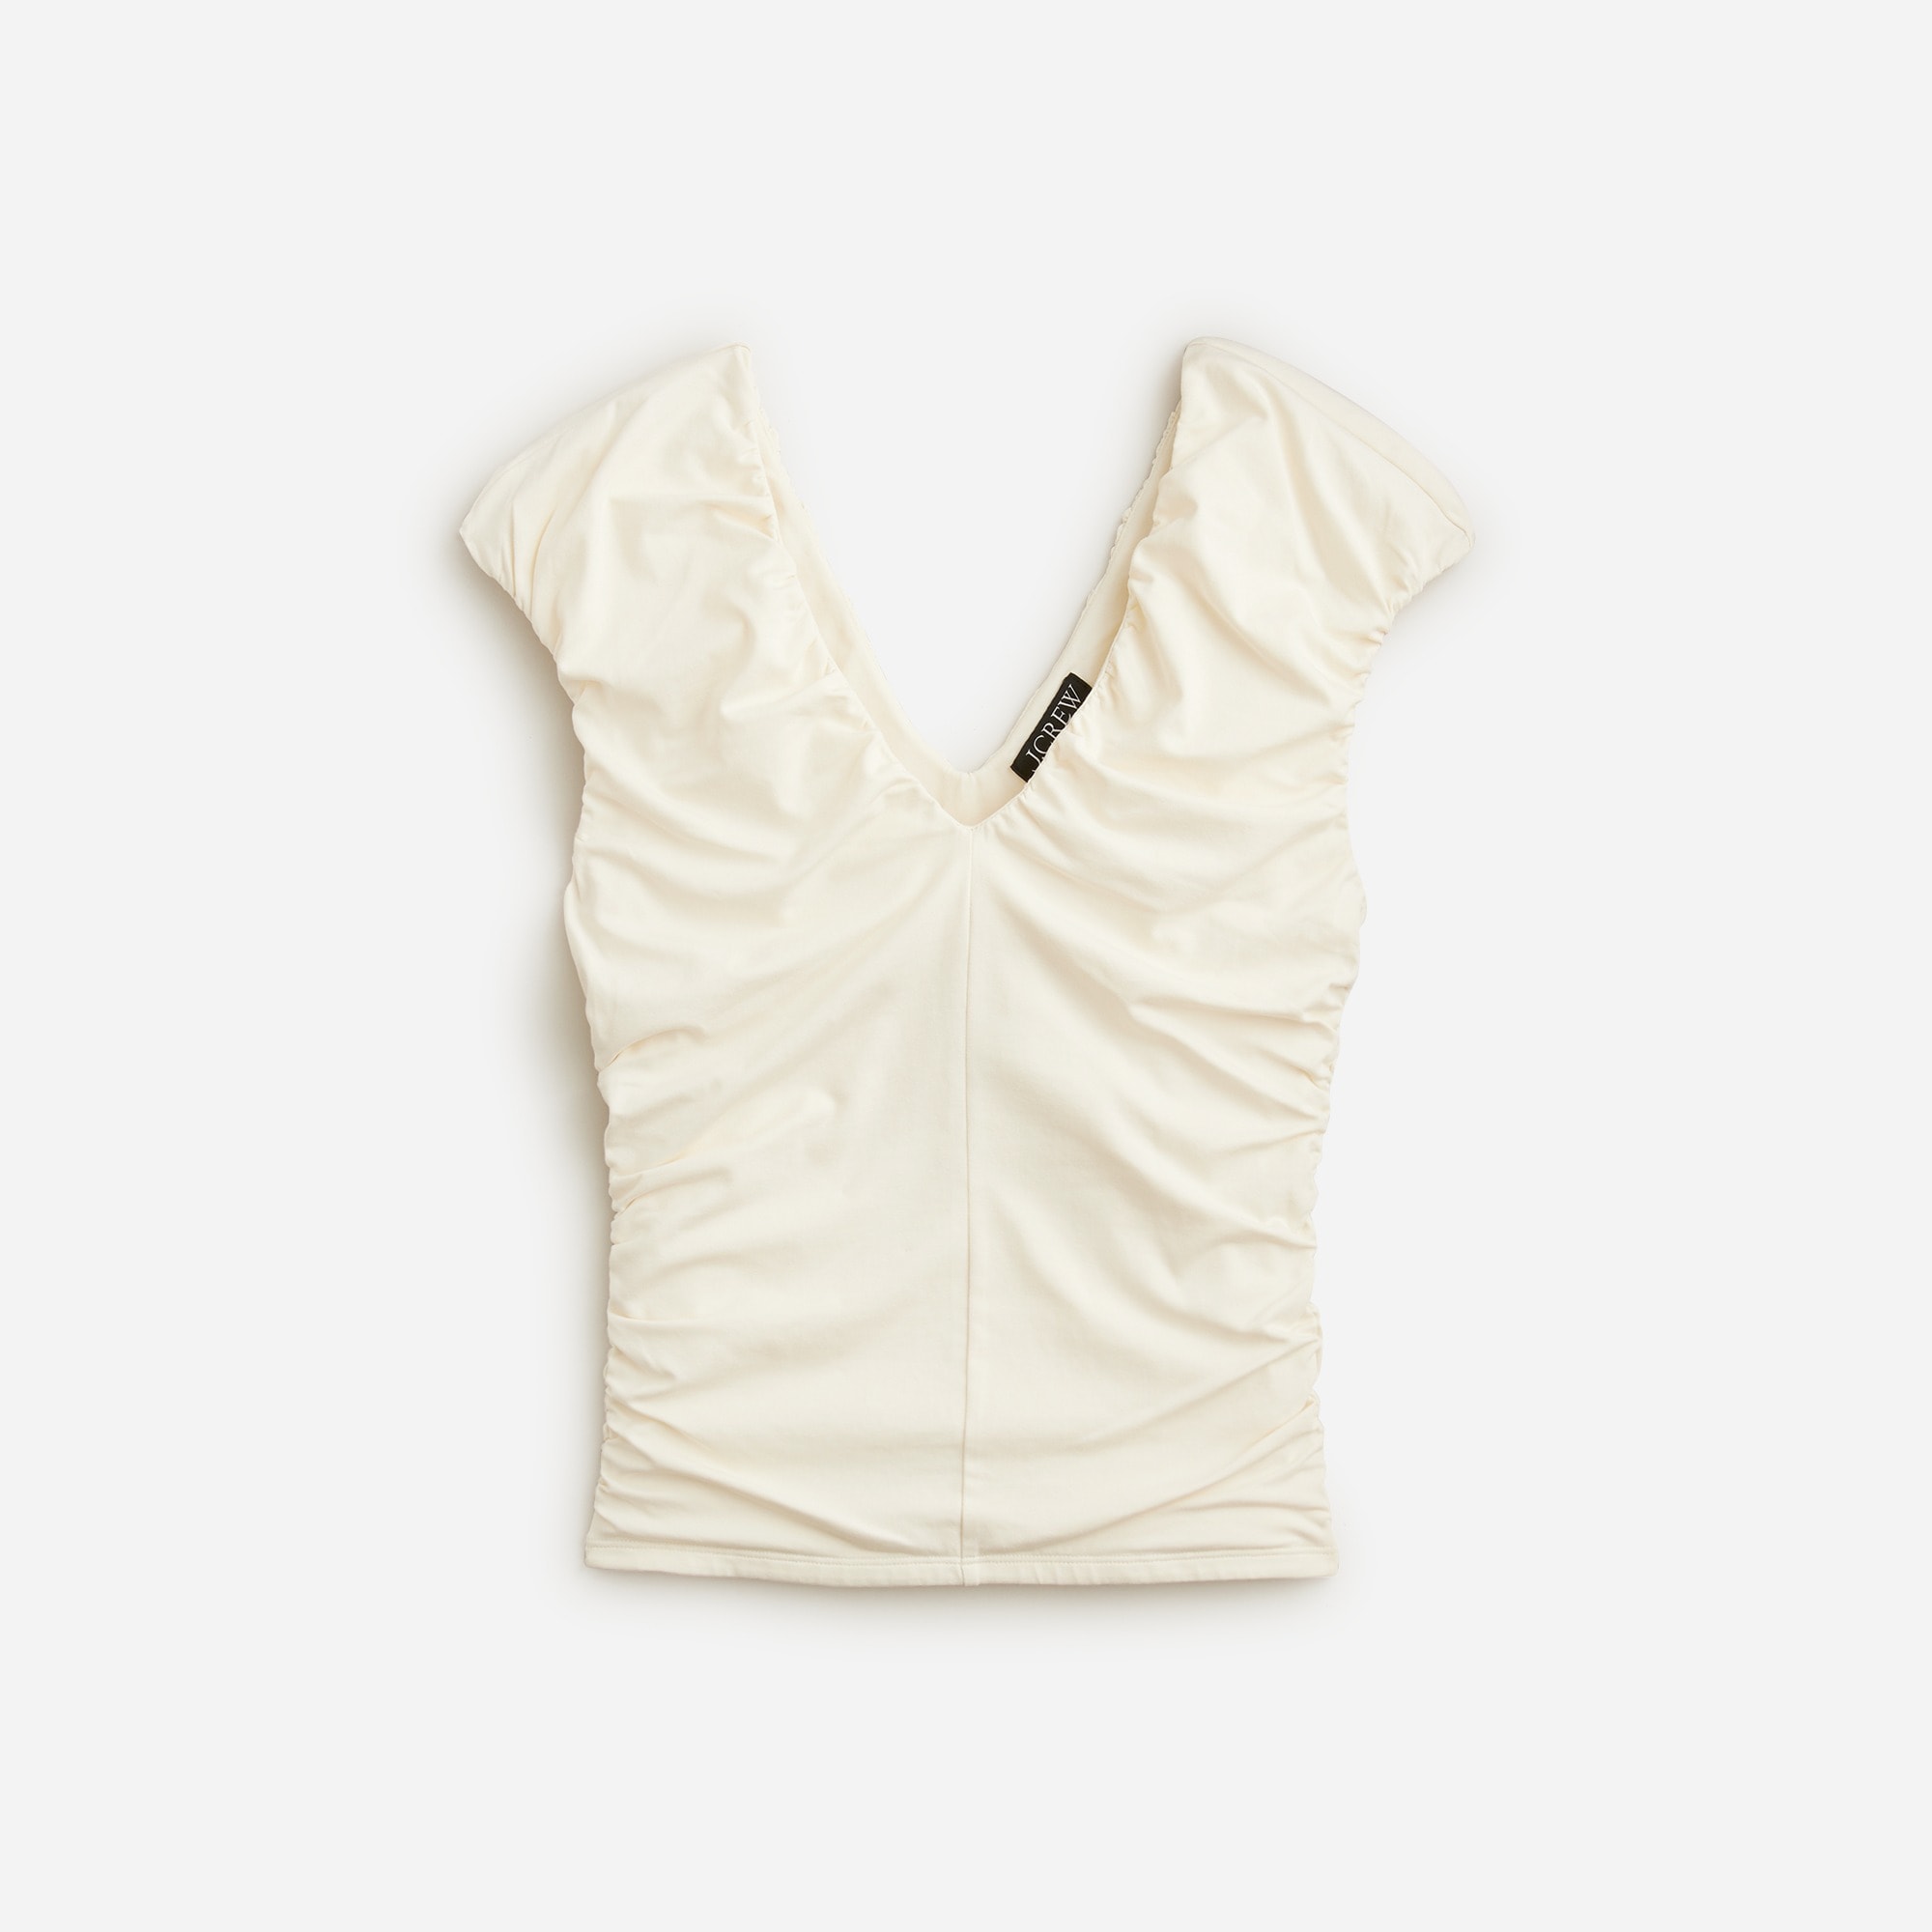  Ruched V-neck top in stretch cotton blend